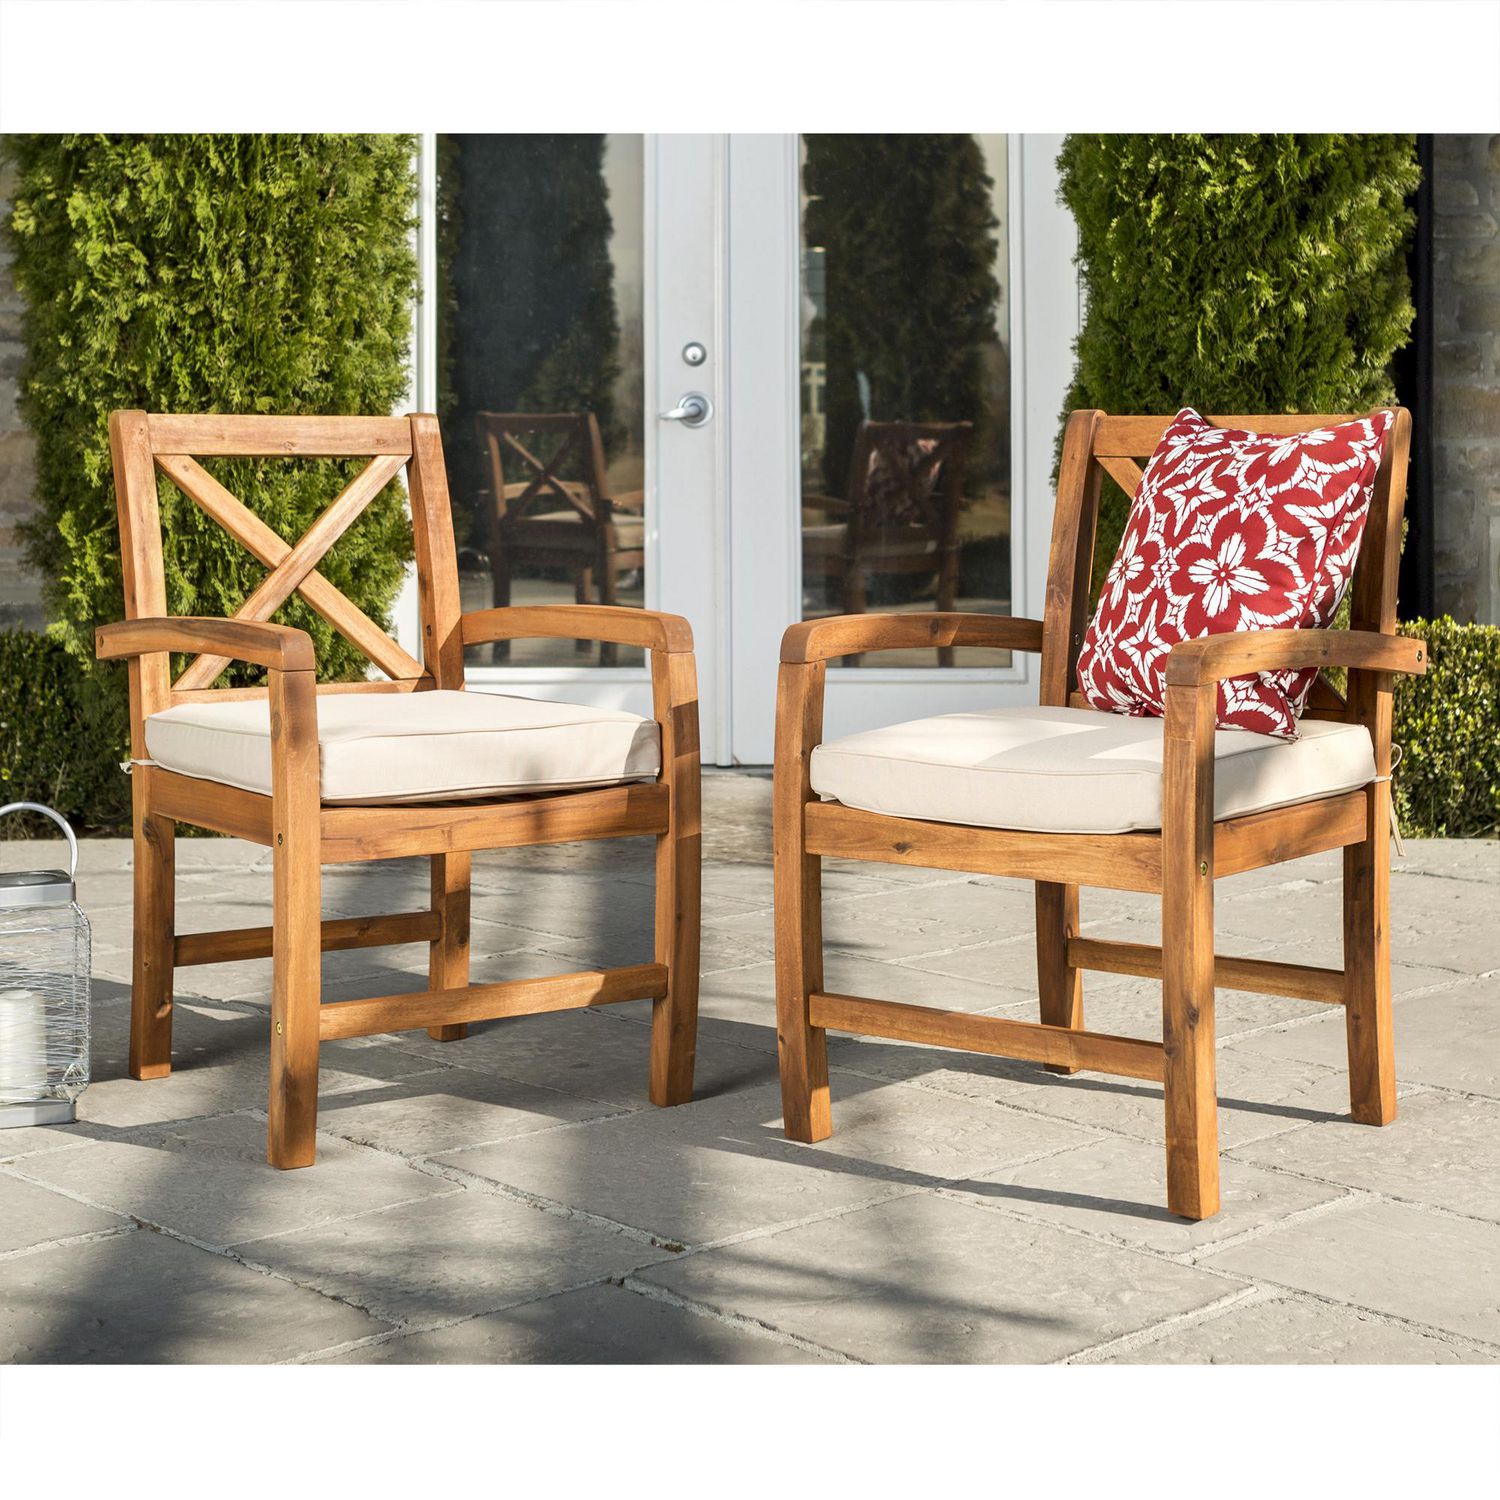 Manor Park Wood X Back Outdoor Patio, Manor Park Outdoor Wood Patio Chairs With Cushions